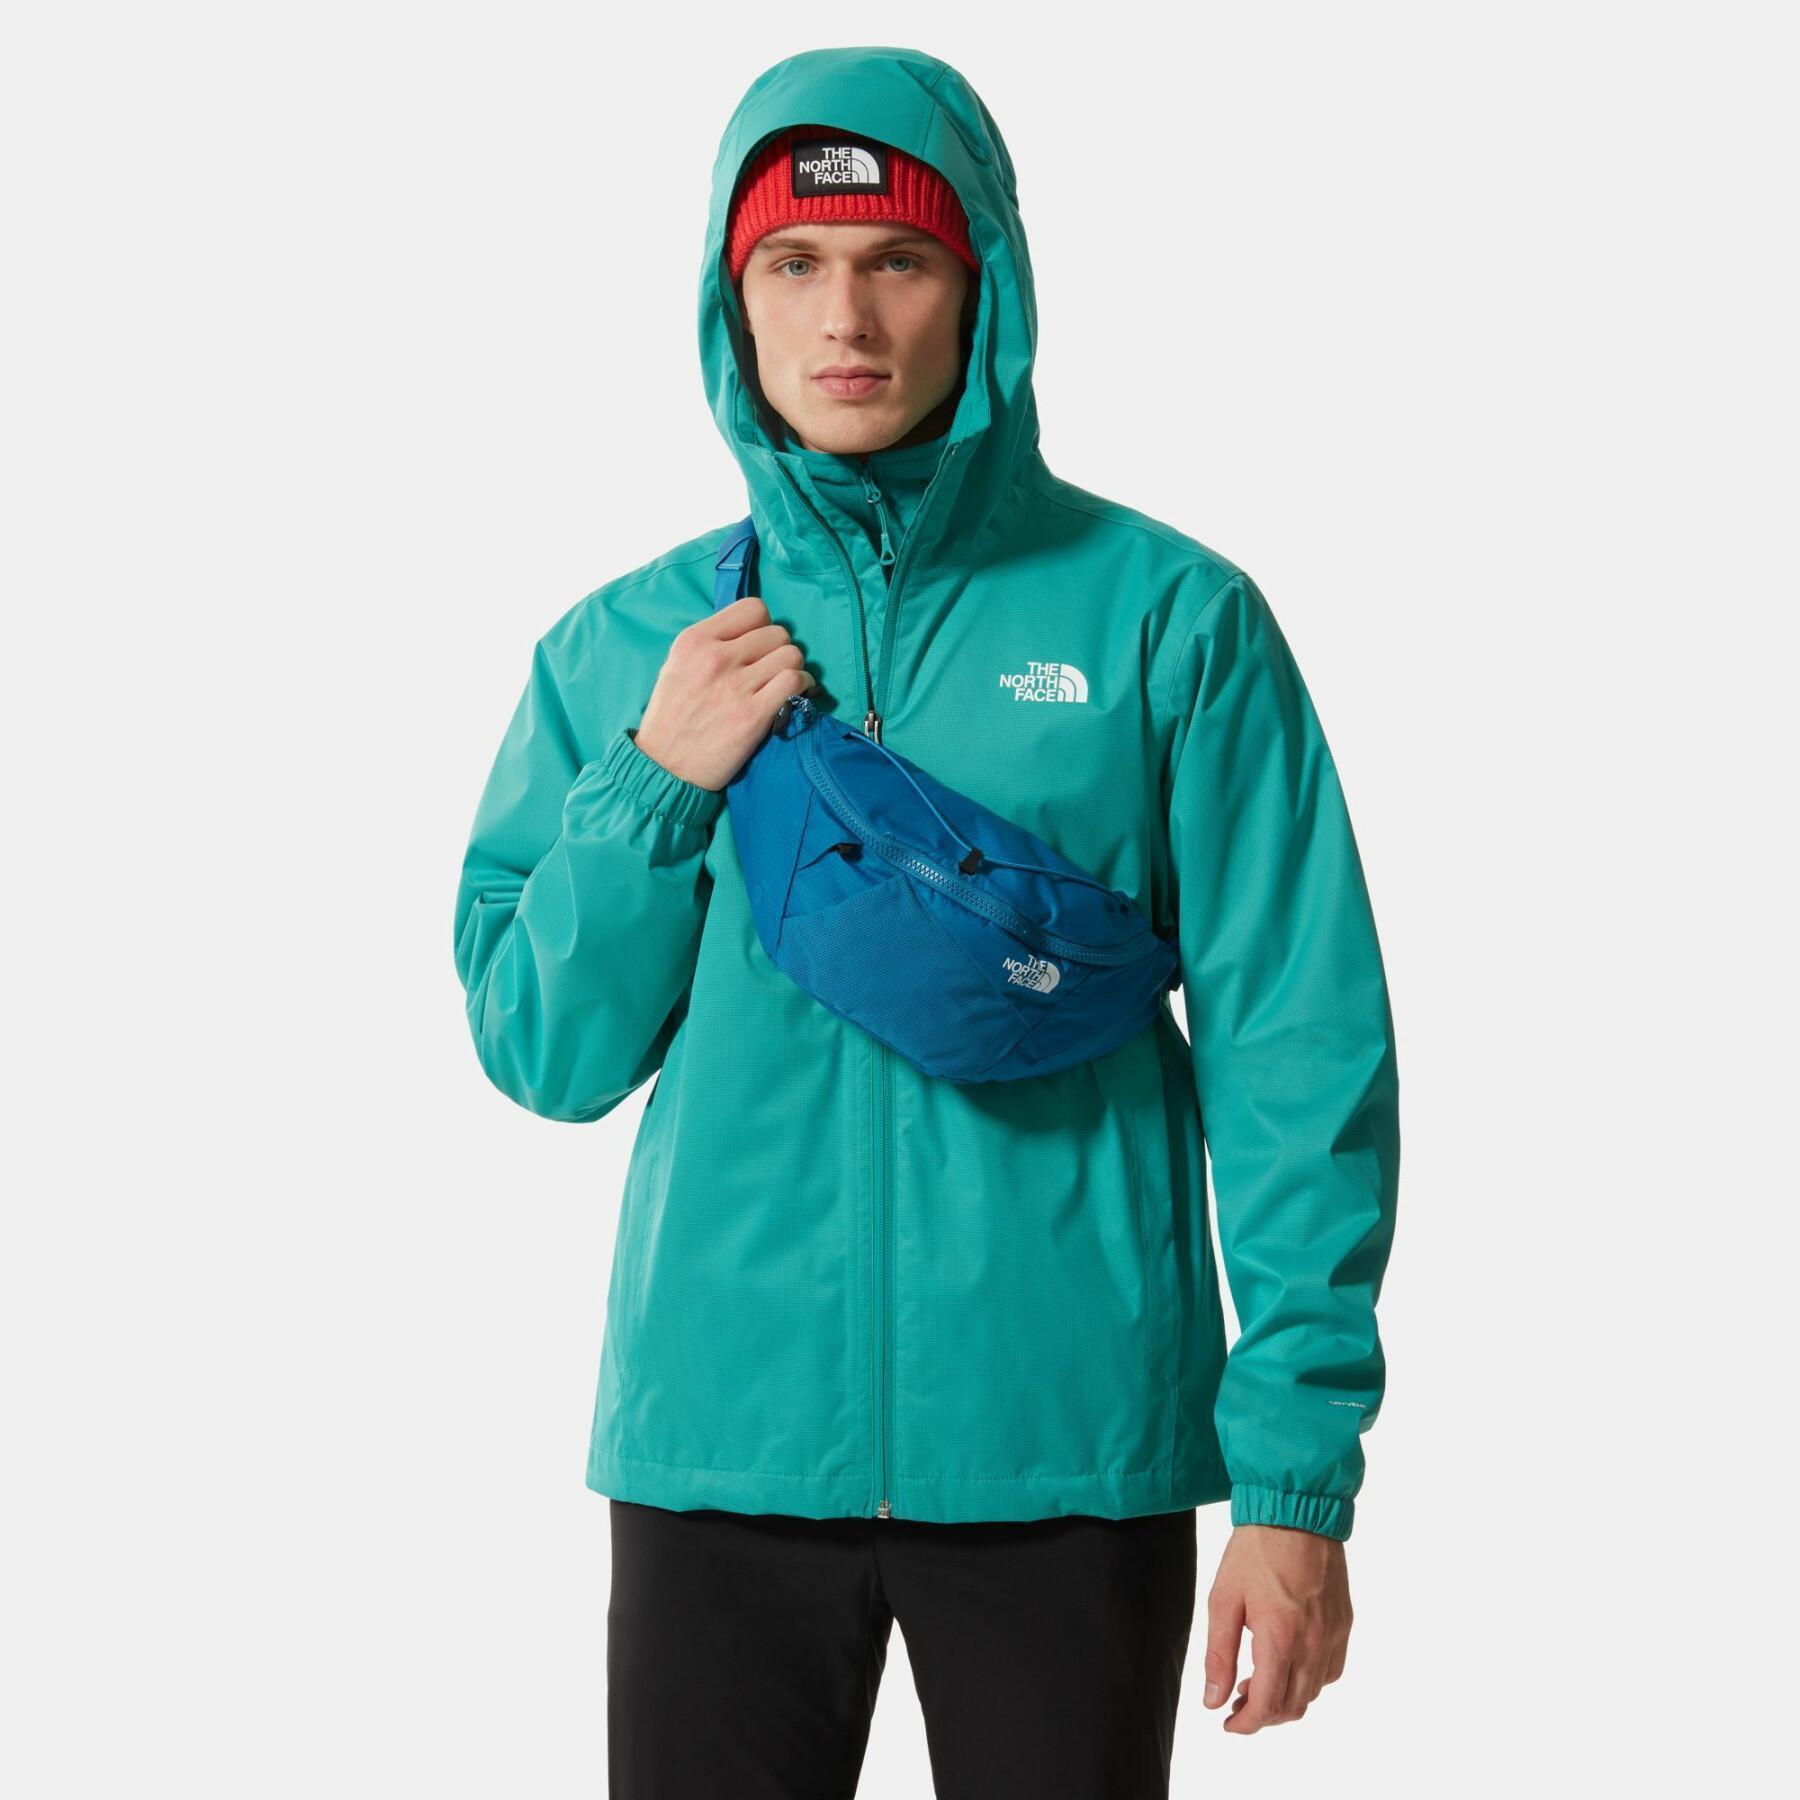 Bananpåse The North Face Lumbnical - S